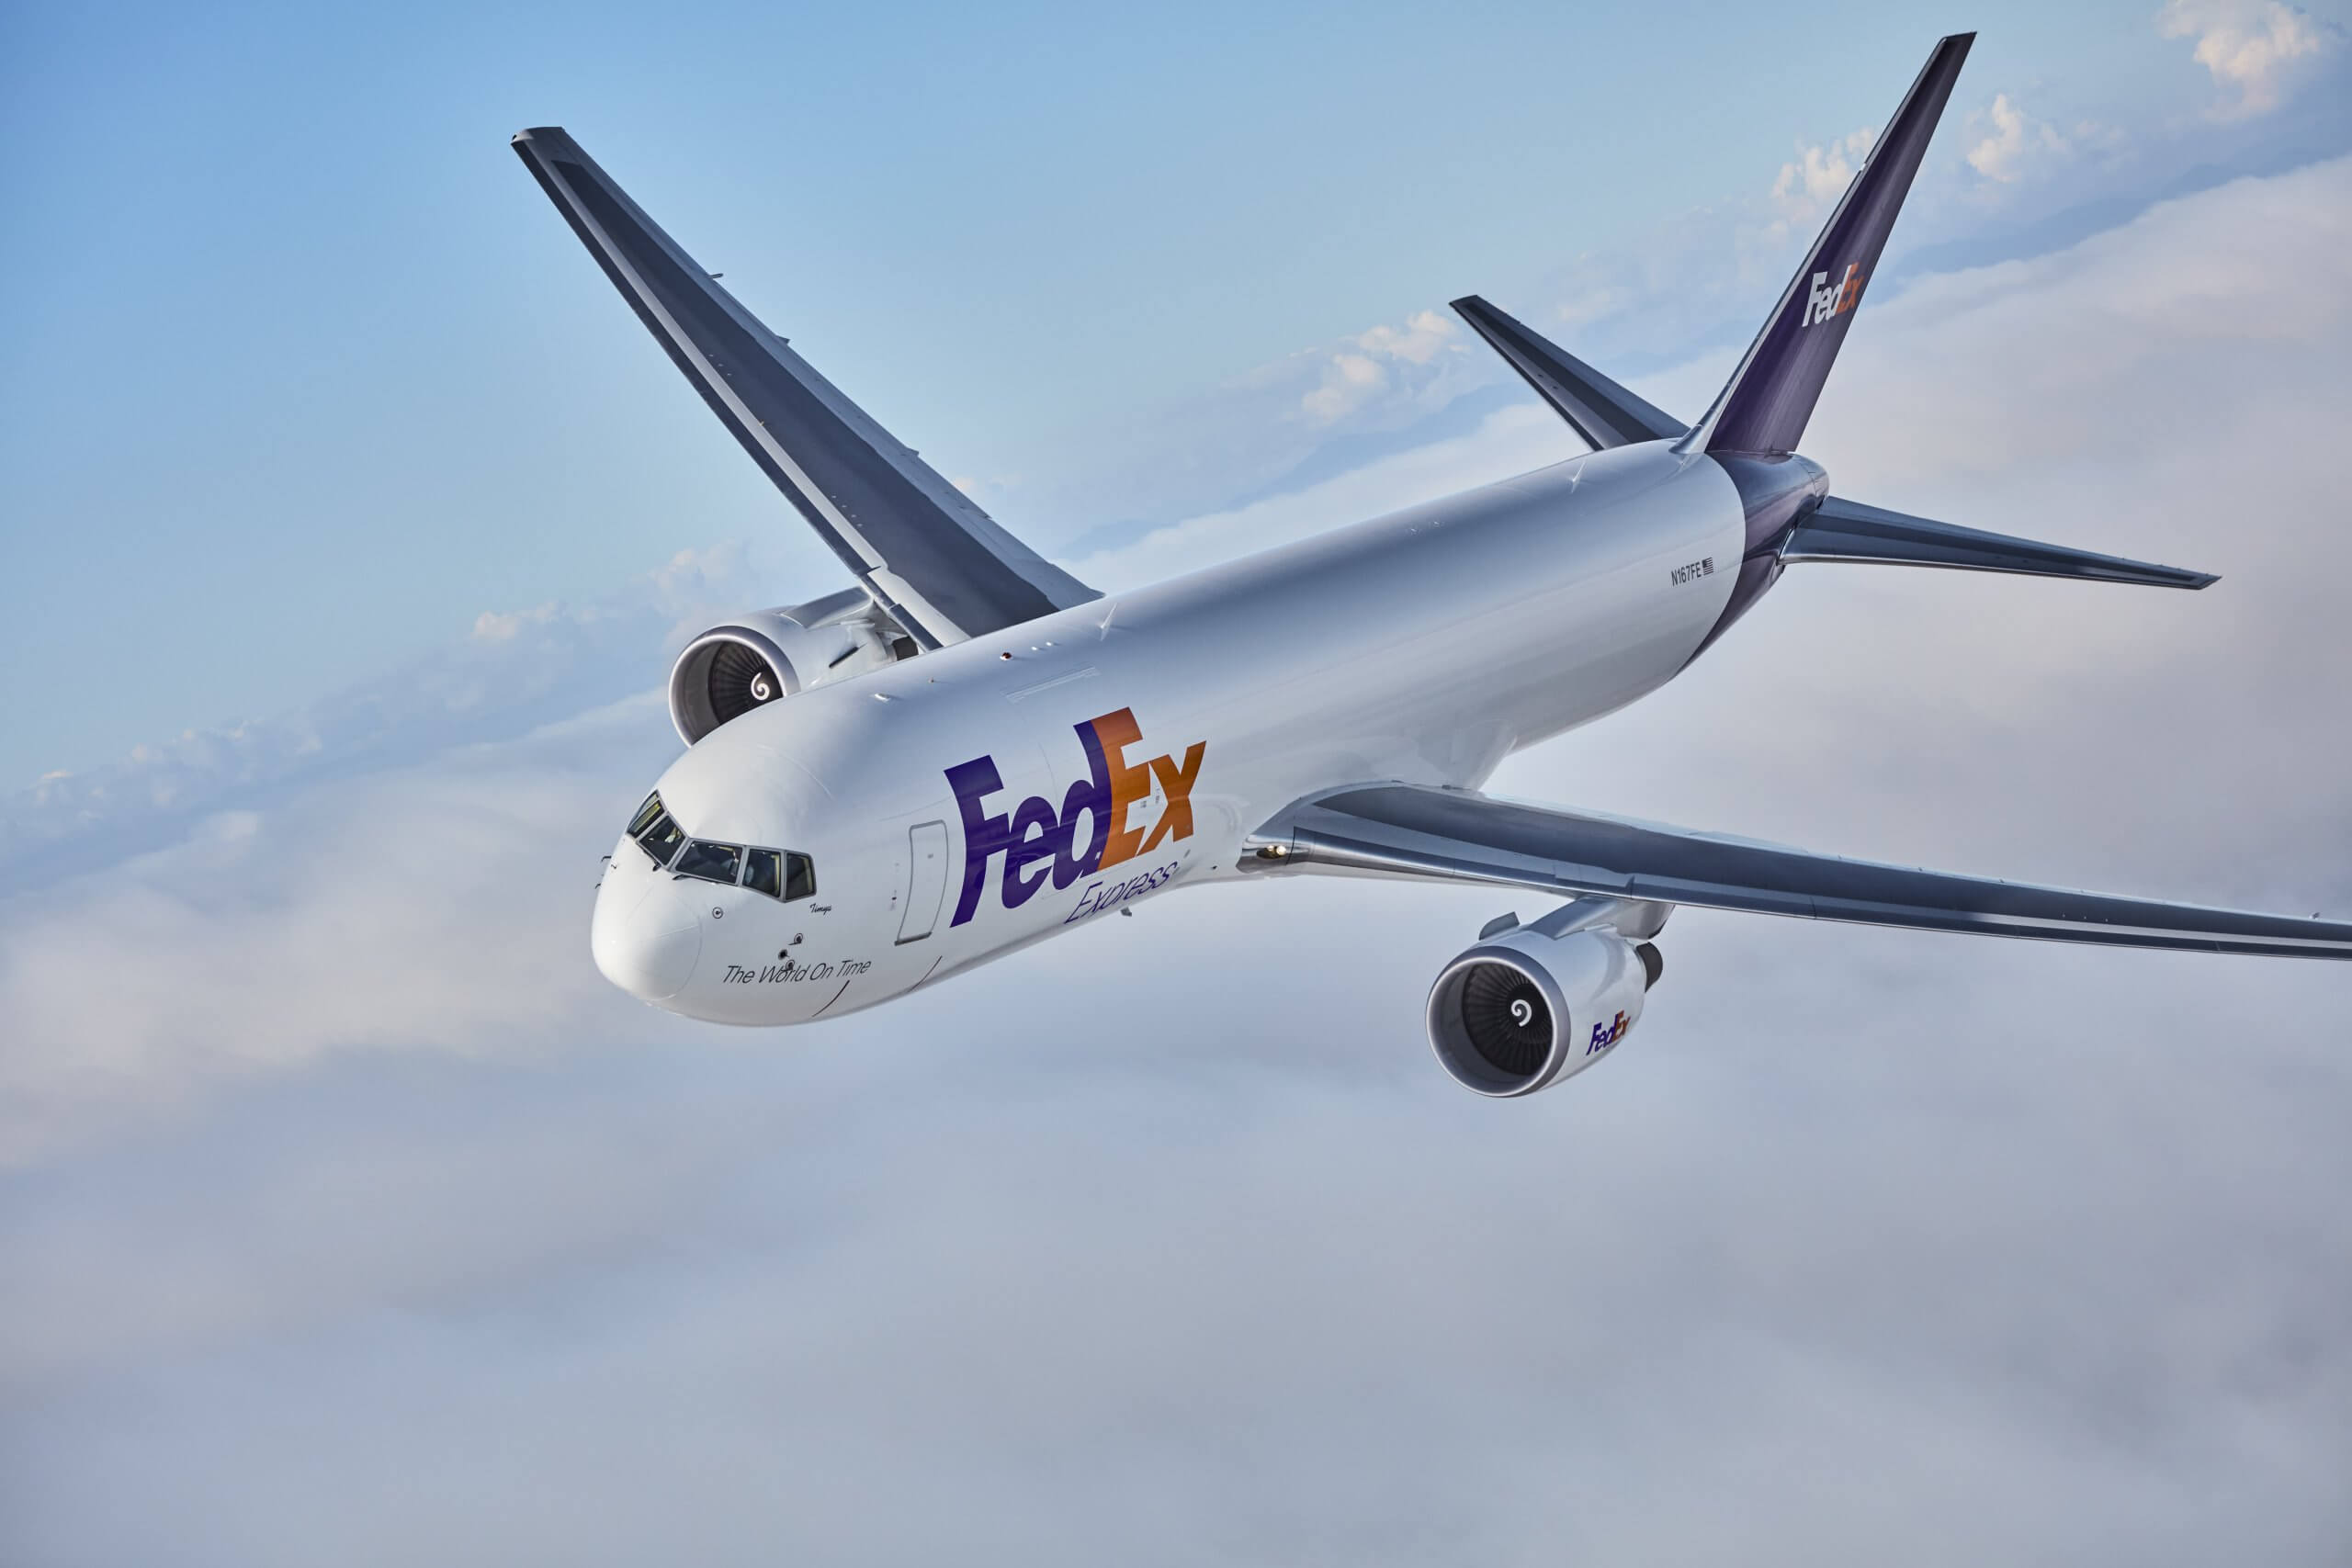 A Fedex plane flying above the clouds.